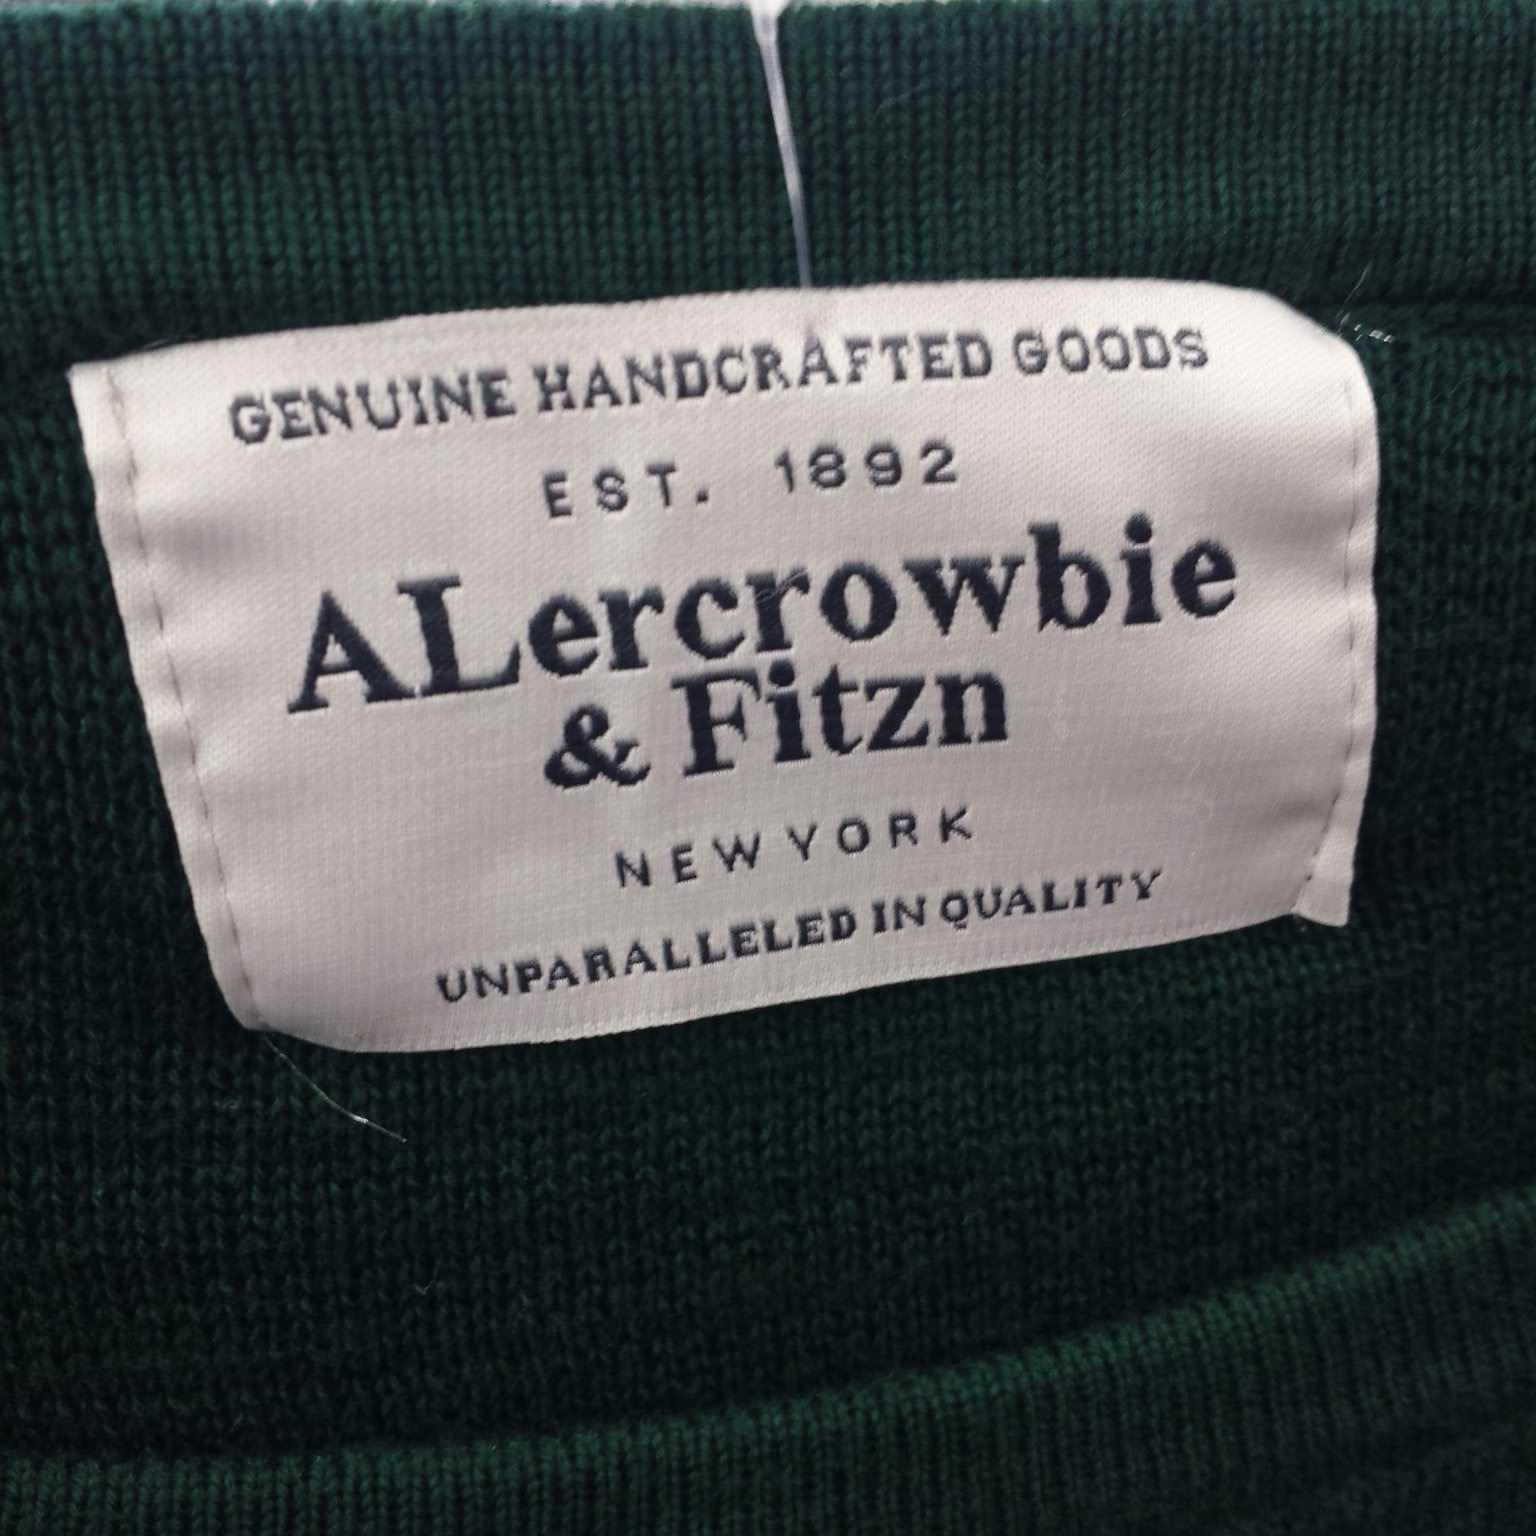 label - Genuine Handcrafted Goods Est. 1892 ALercrowbie & Fitzn New York Unparalleled In Quality